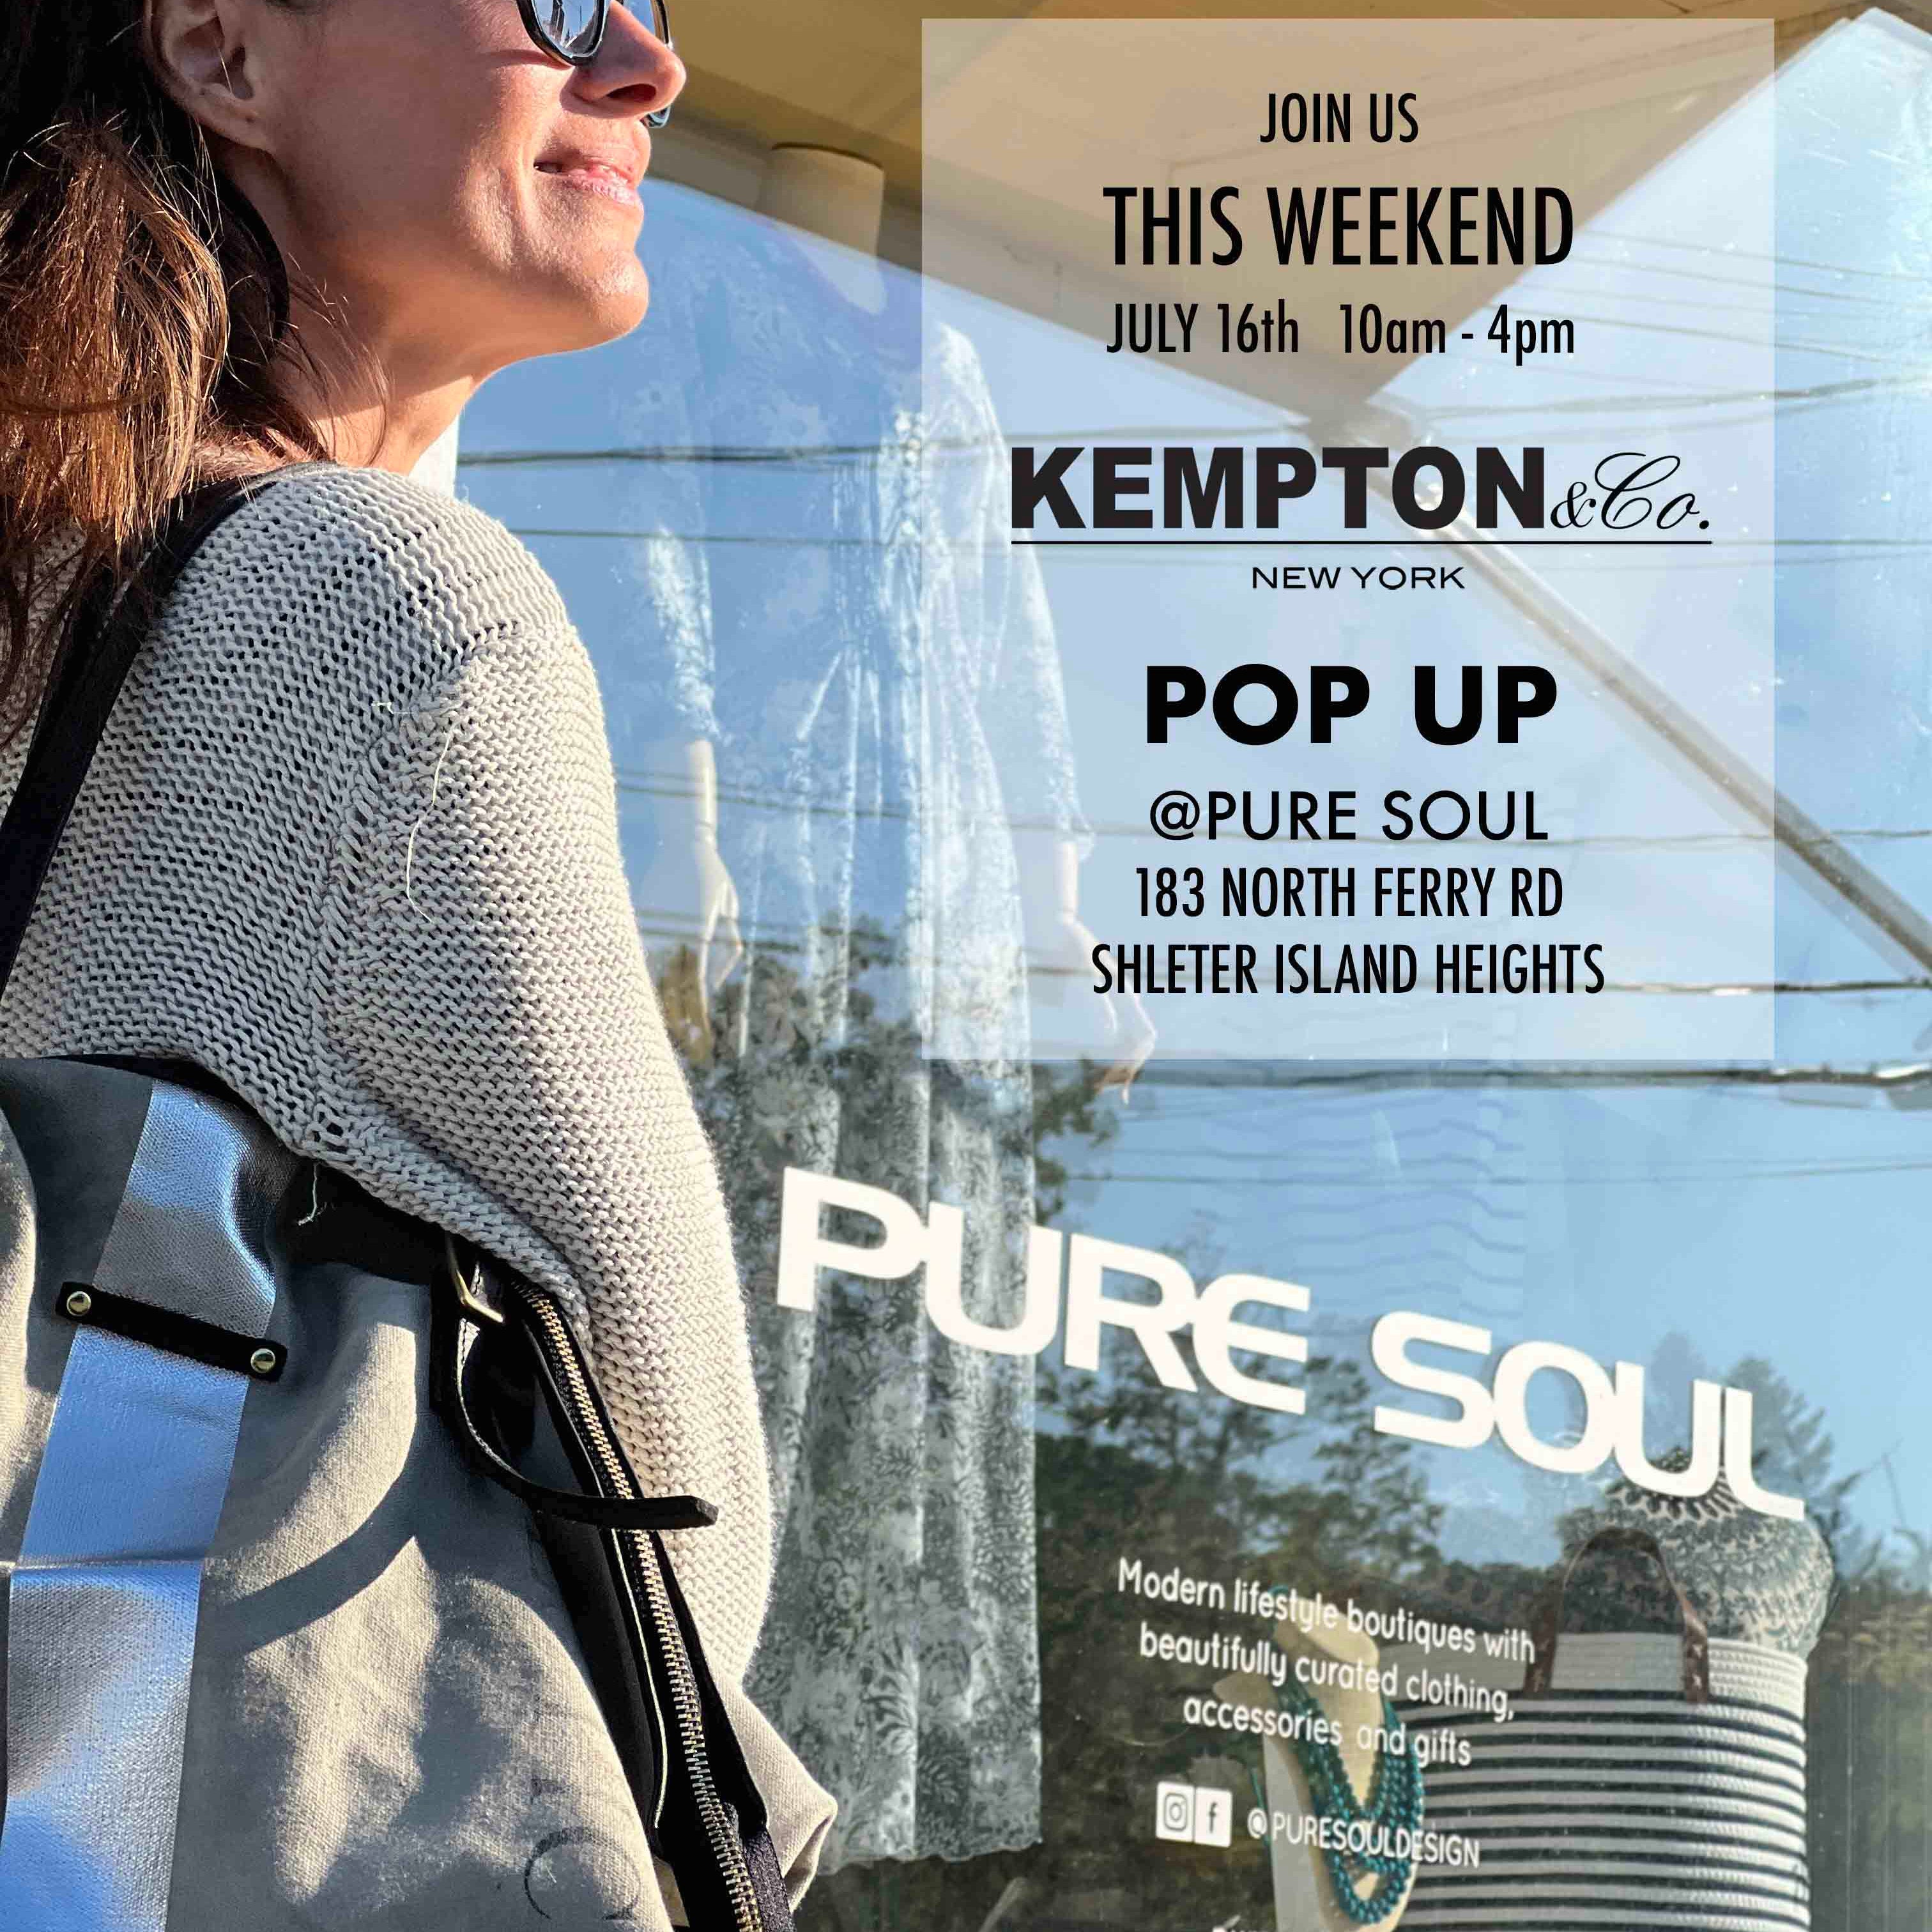 Kempton & Co. Beach Pop-Up event in Shelter Island 